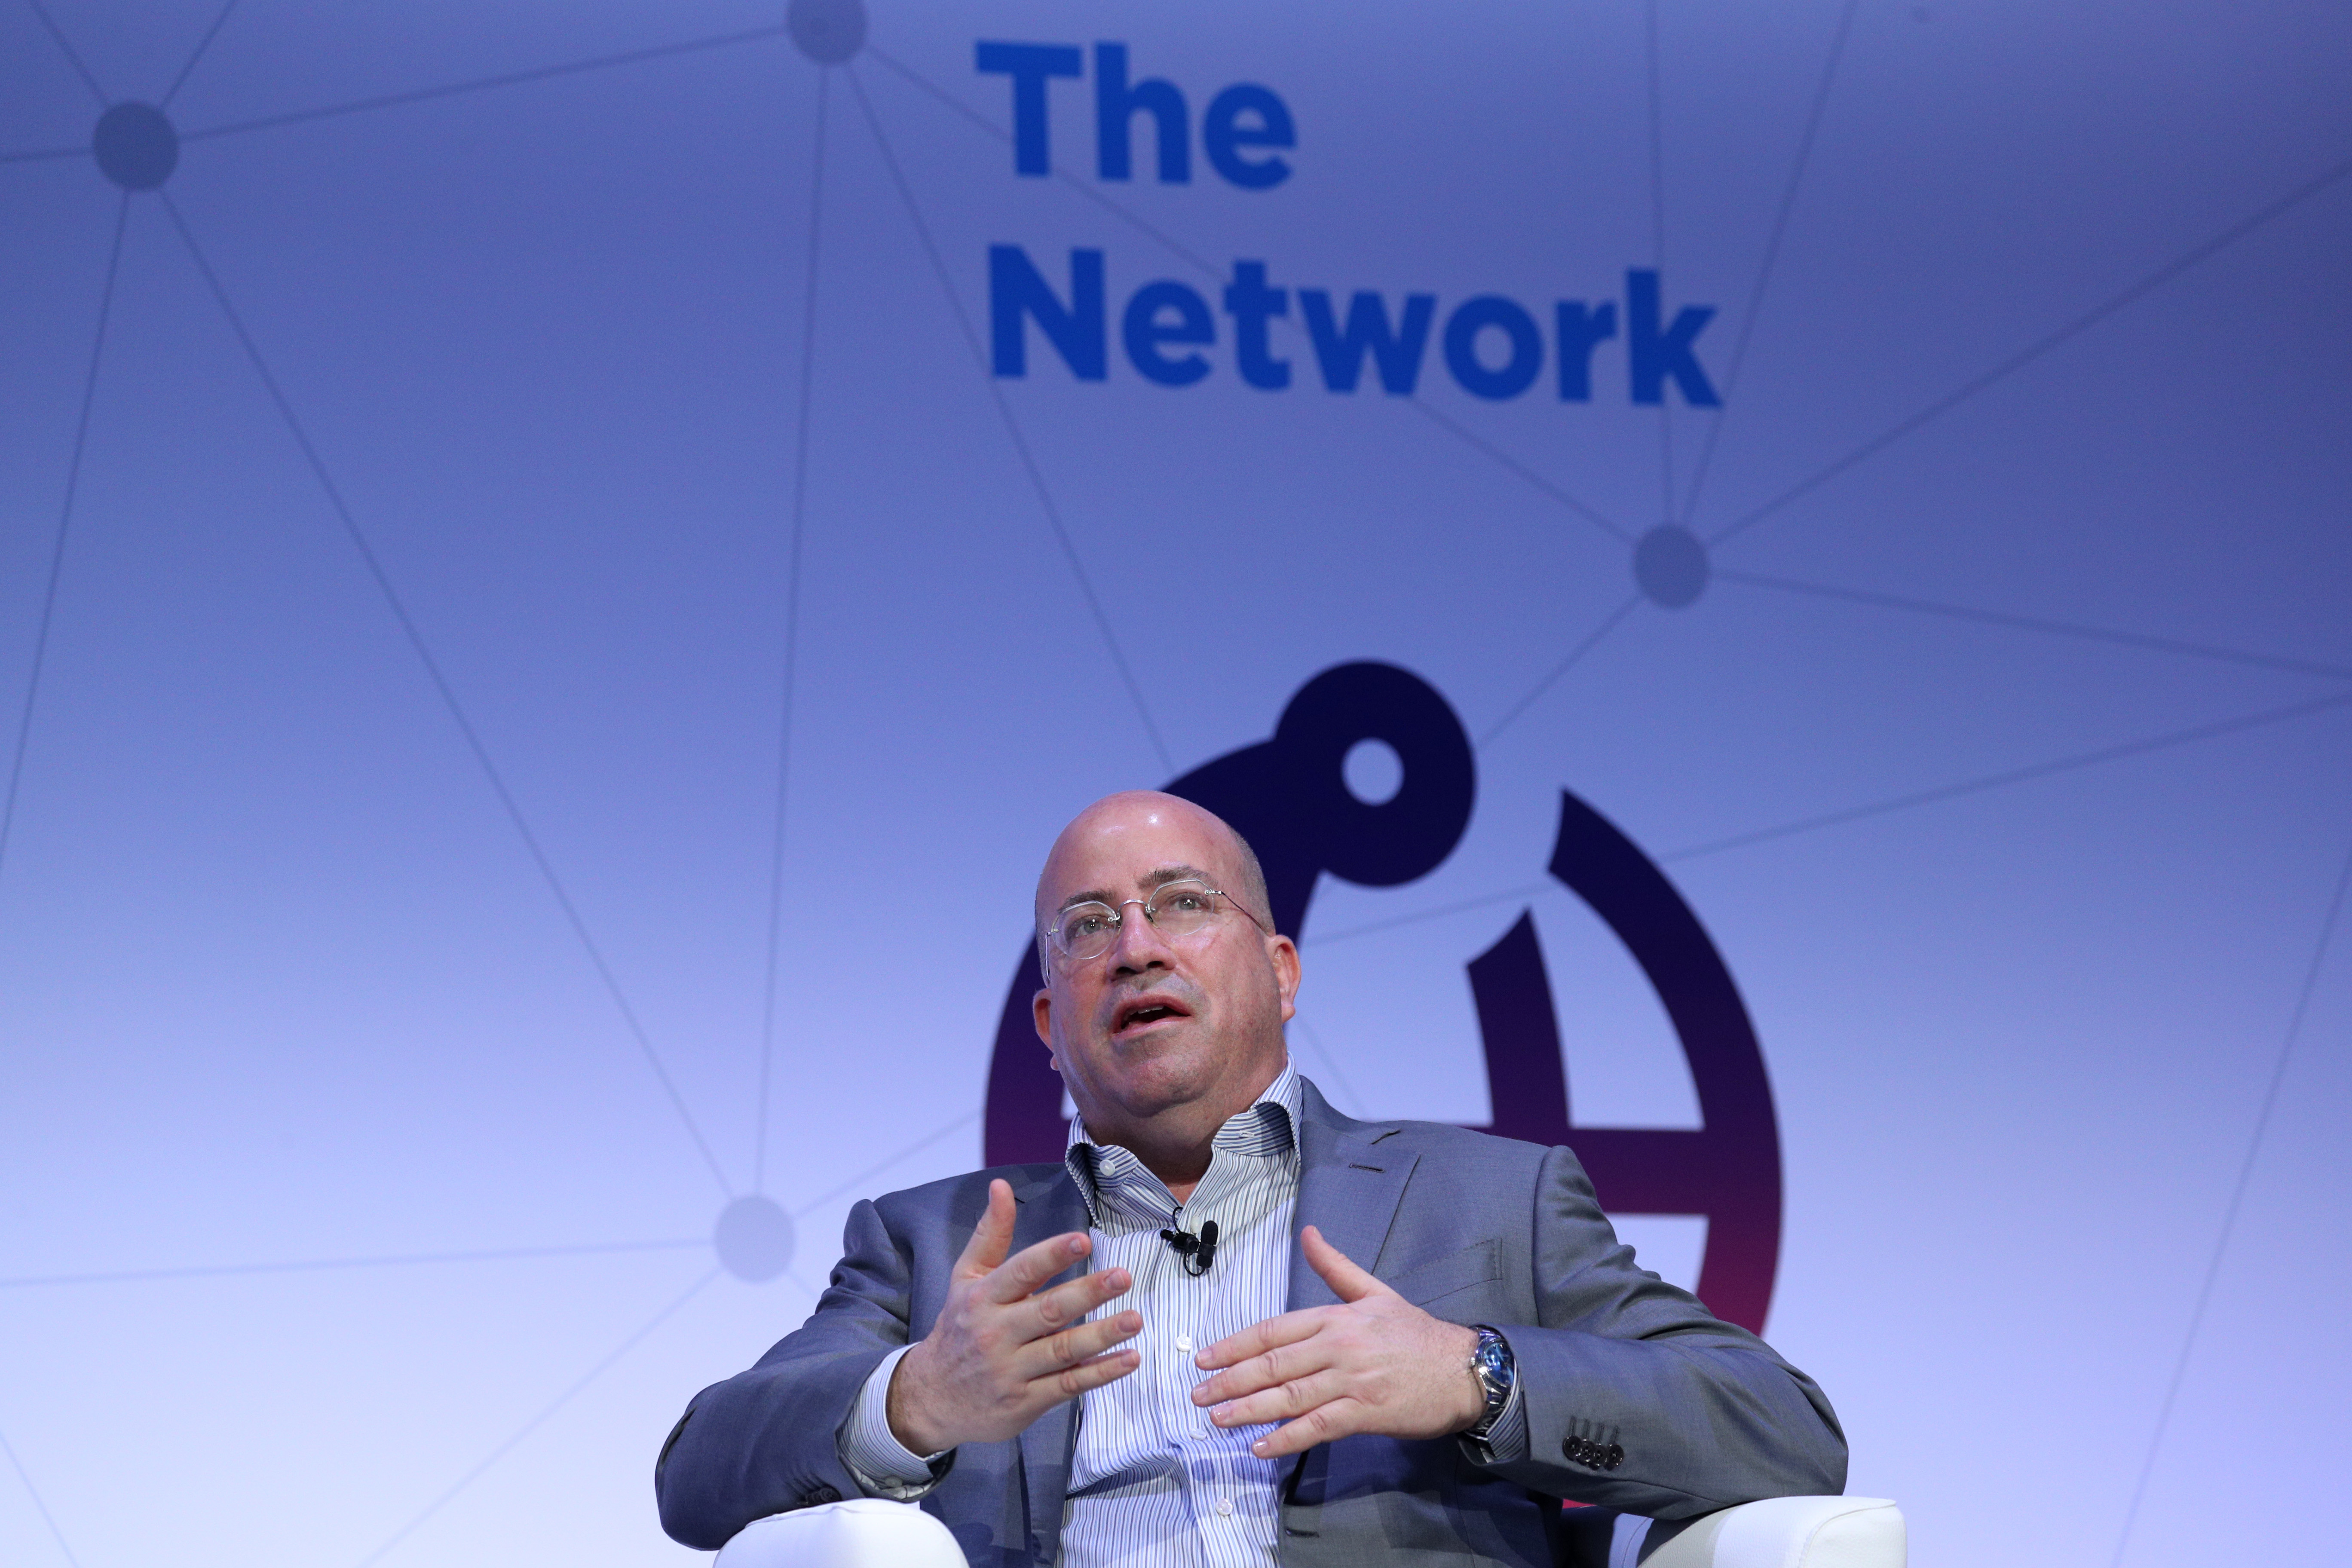 CNN President Jeff Zucker attends a keynote event at the Mobile World Congress in Barcelona, Spain, February 26, 2018. REUTERS/Sergio Perez - UP1EE2Q1A1CH8